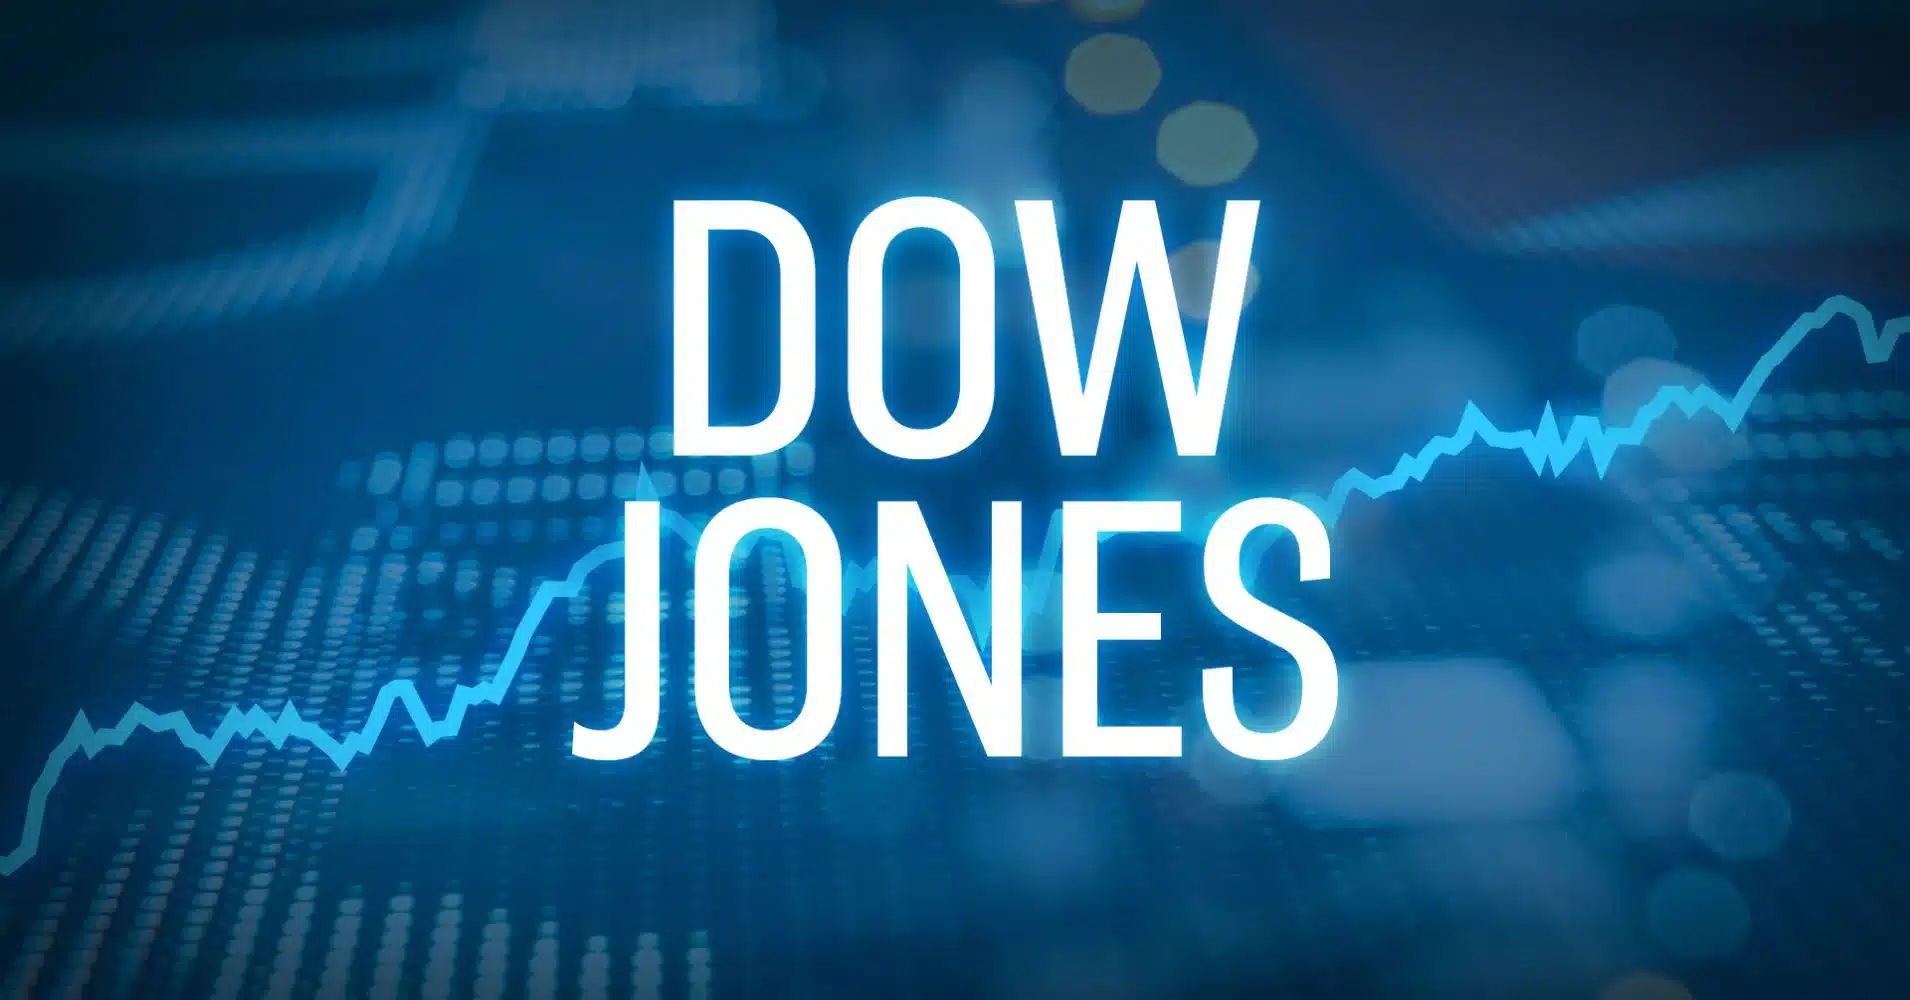 Dow Jones Industrial Average Is in the Green and Has Surpassed the 39,000.00 Mark